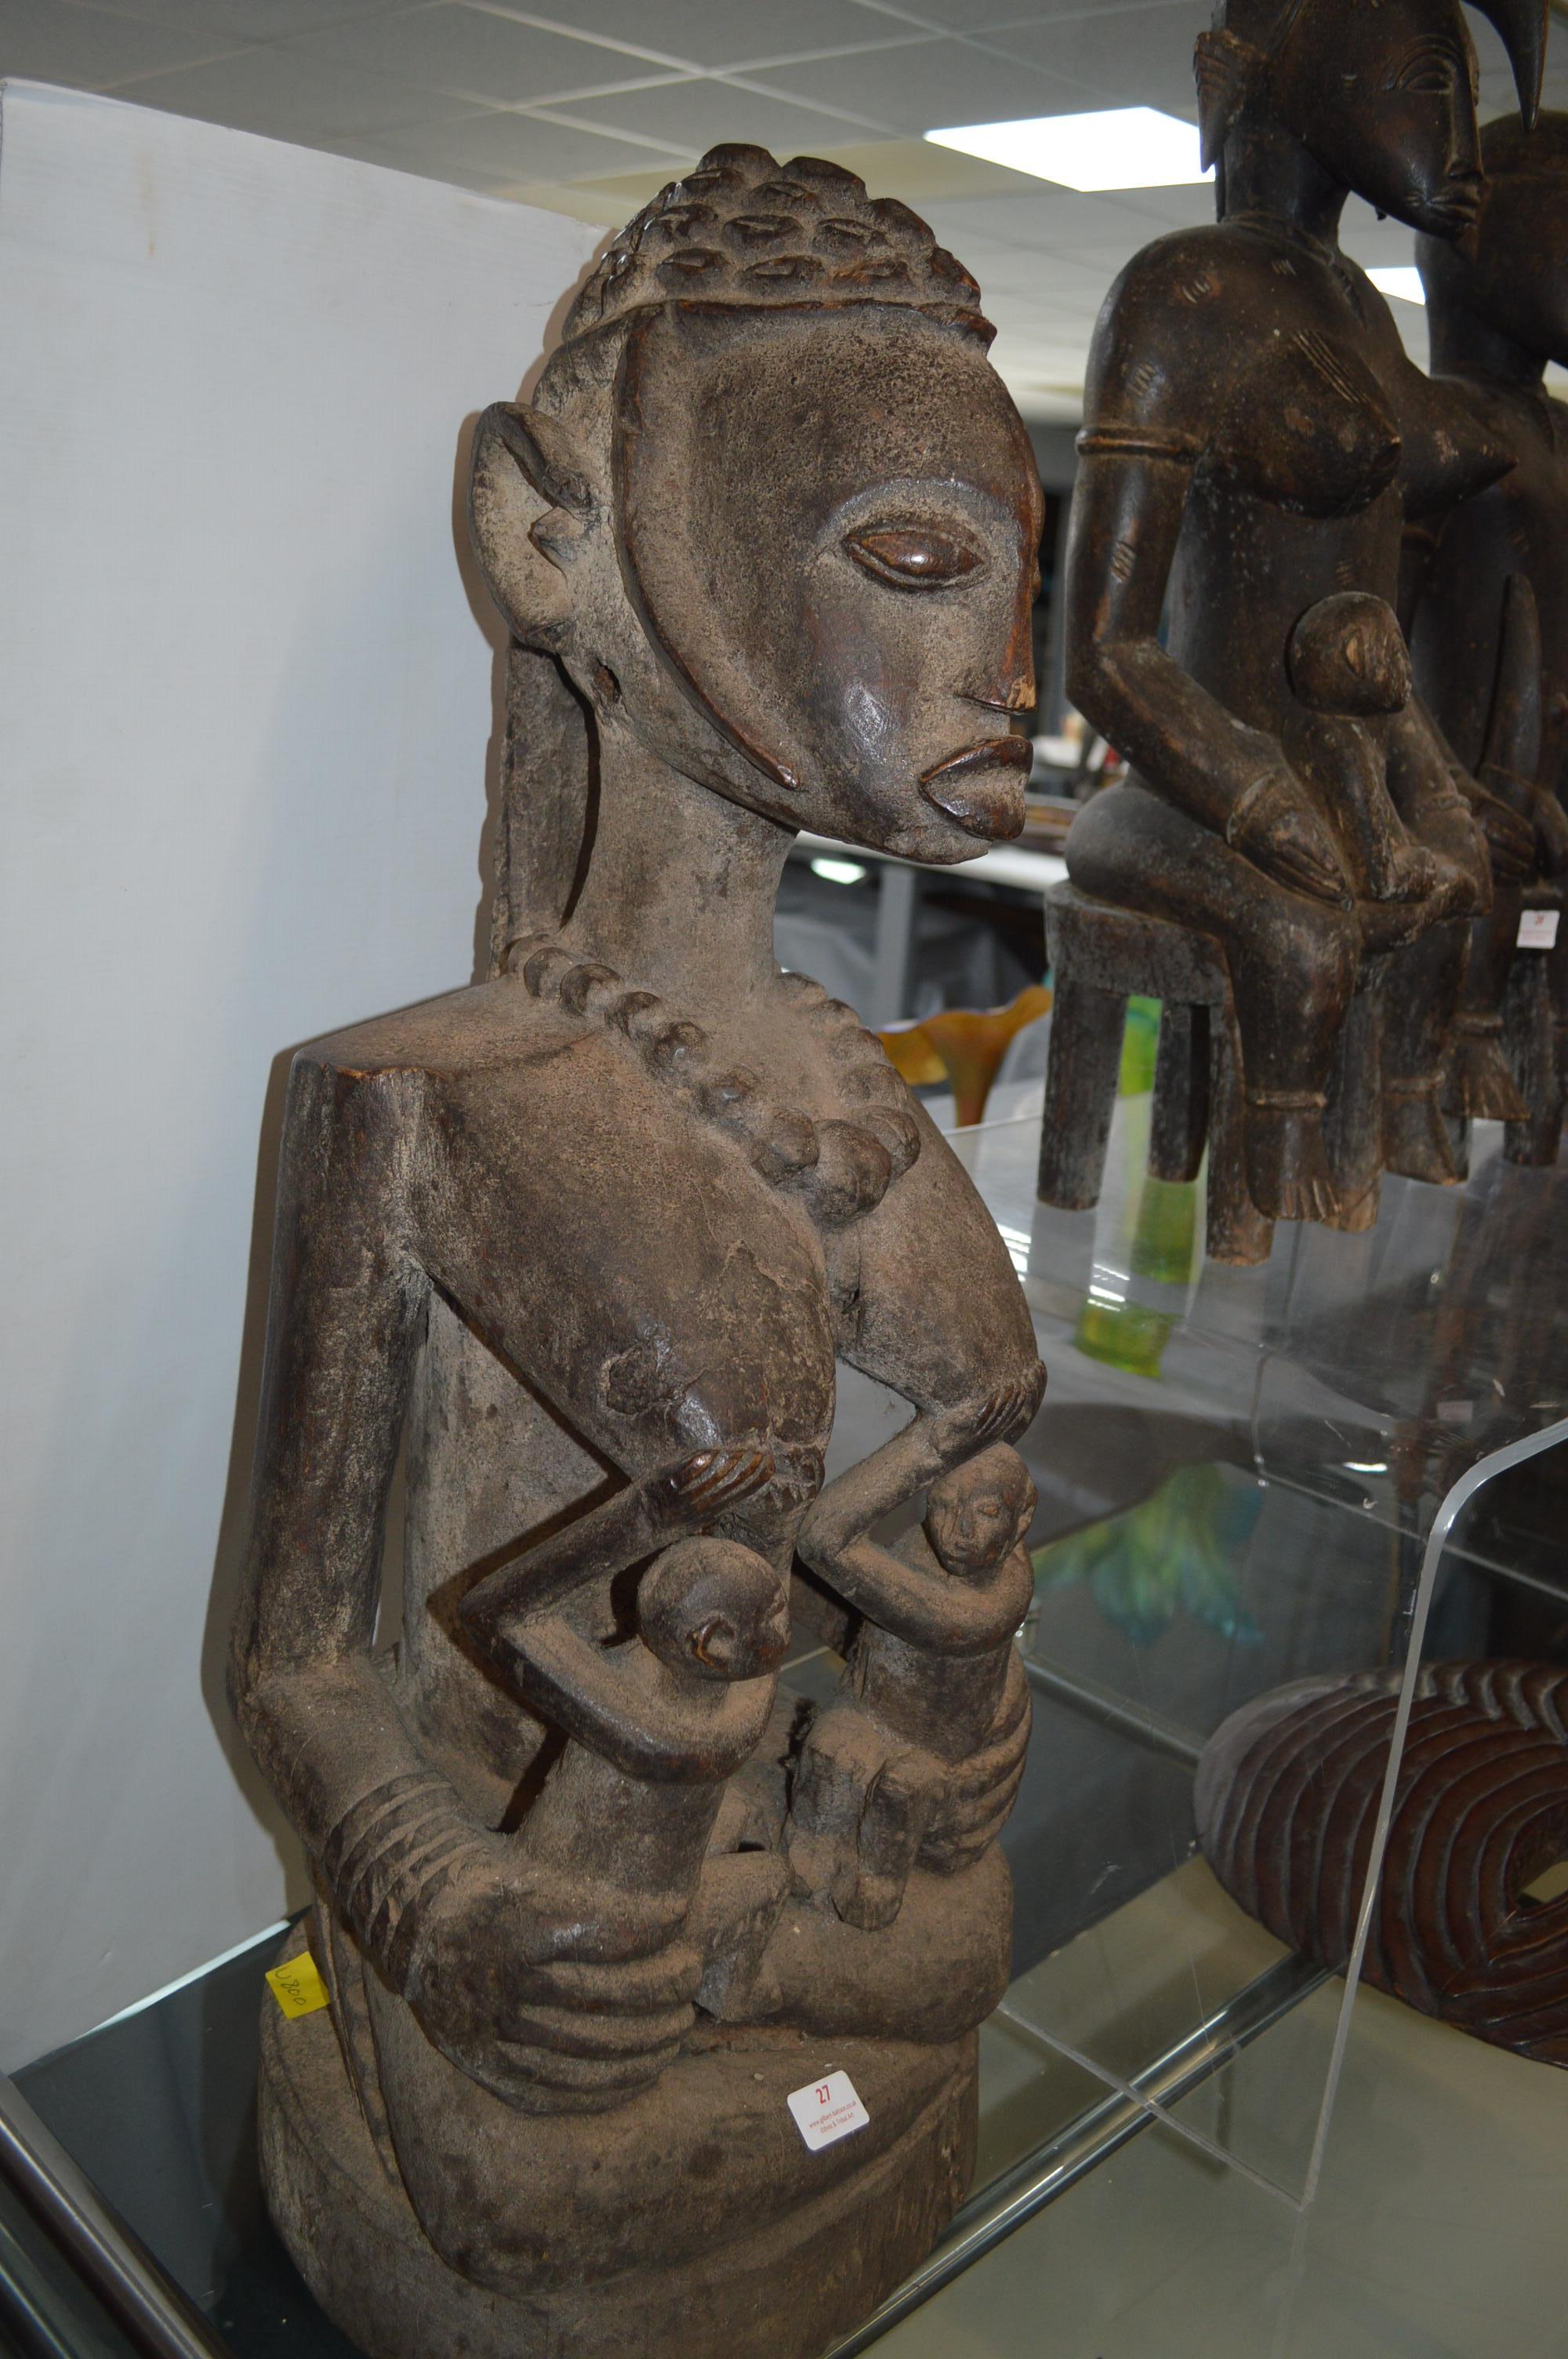 Large Carved Wooden African Fertility Figure 80cm tall - Image 2 of 3